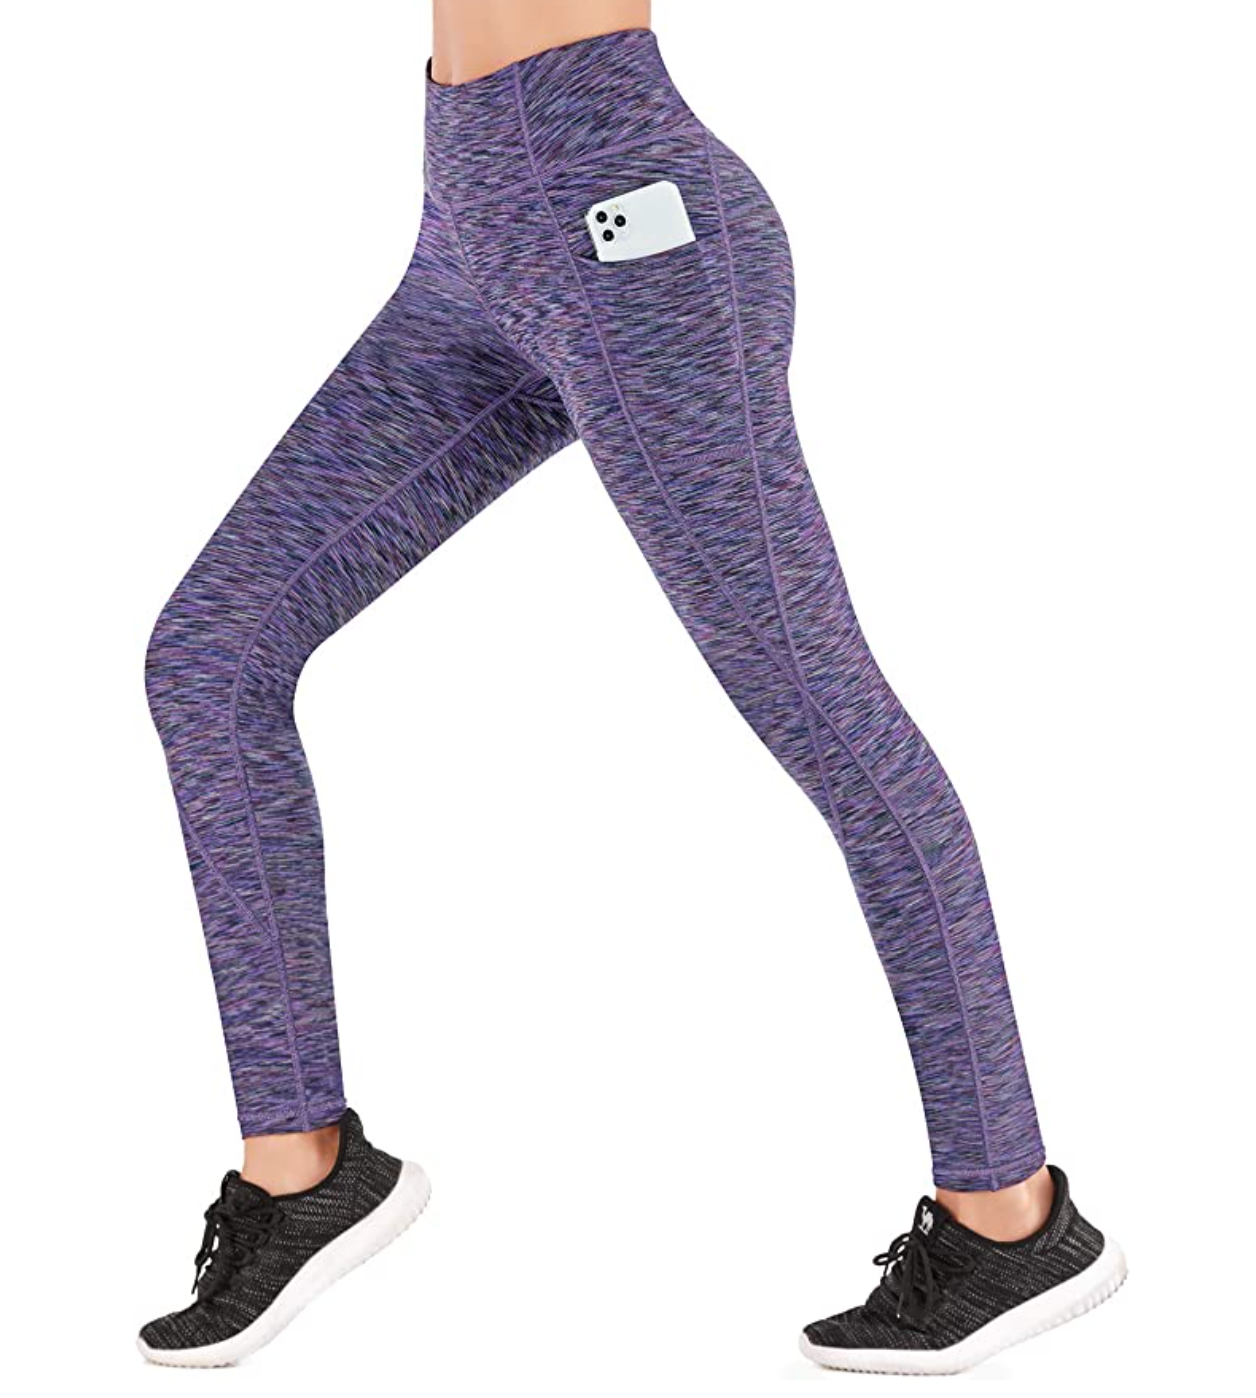 Heathyoga Yoga Pants for Women Leggings with Pockets for